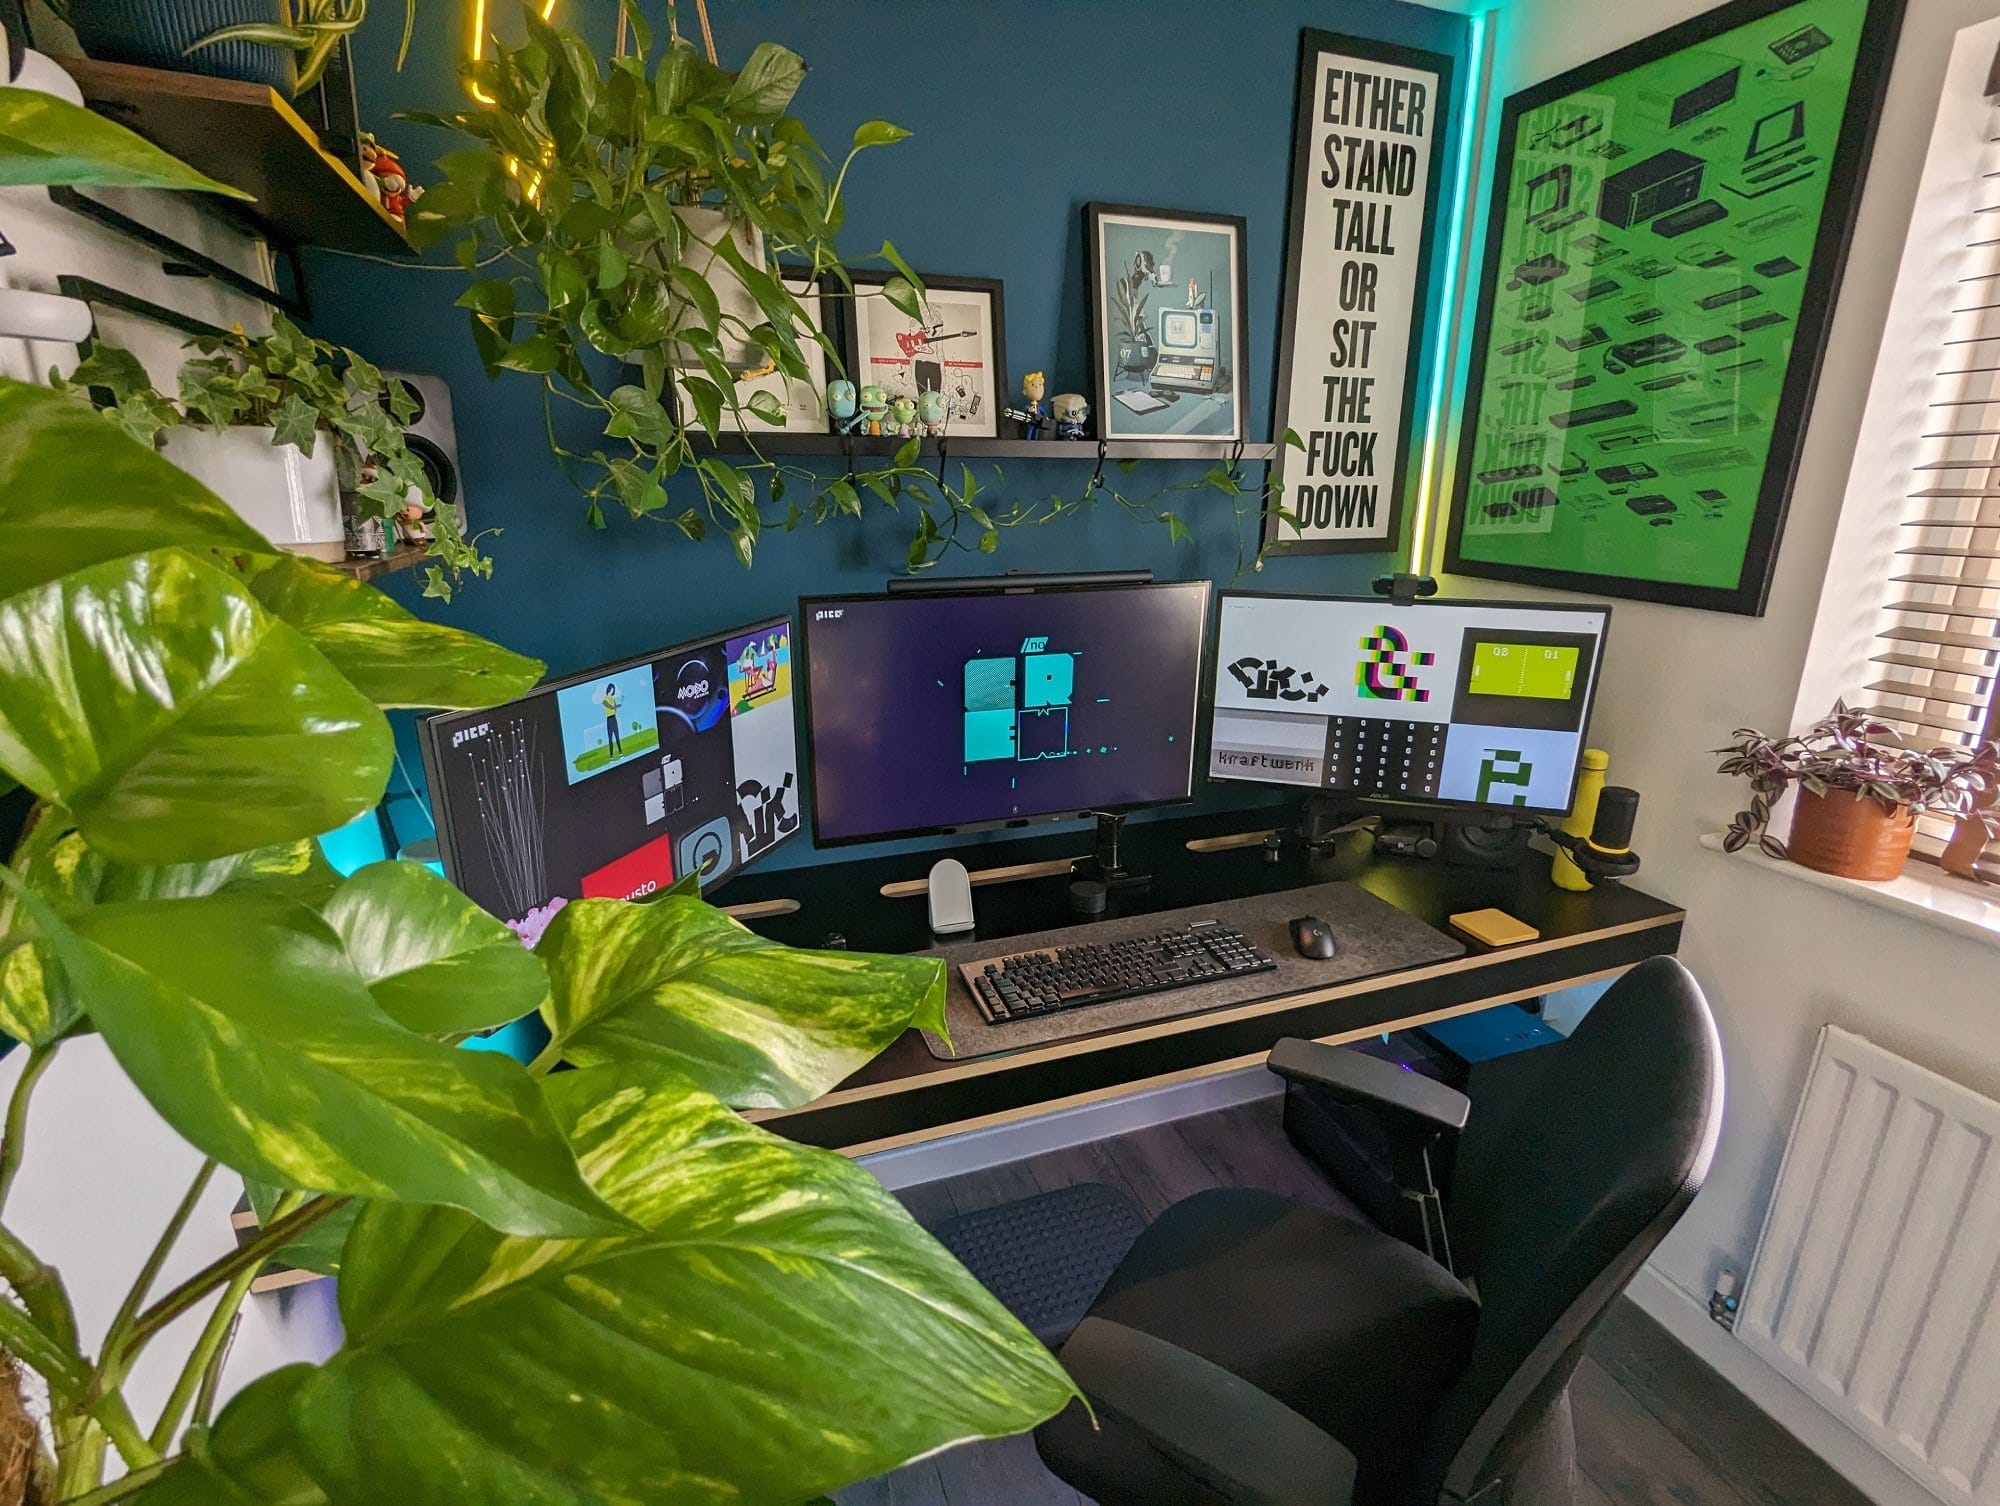 A modern home office setup featuring a triple-monitor desk, lush green plants, framed artwork, motivational posters, and ambient LED lighting